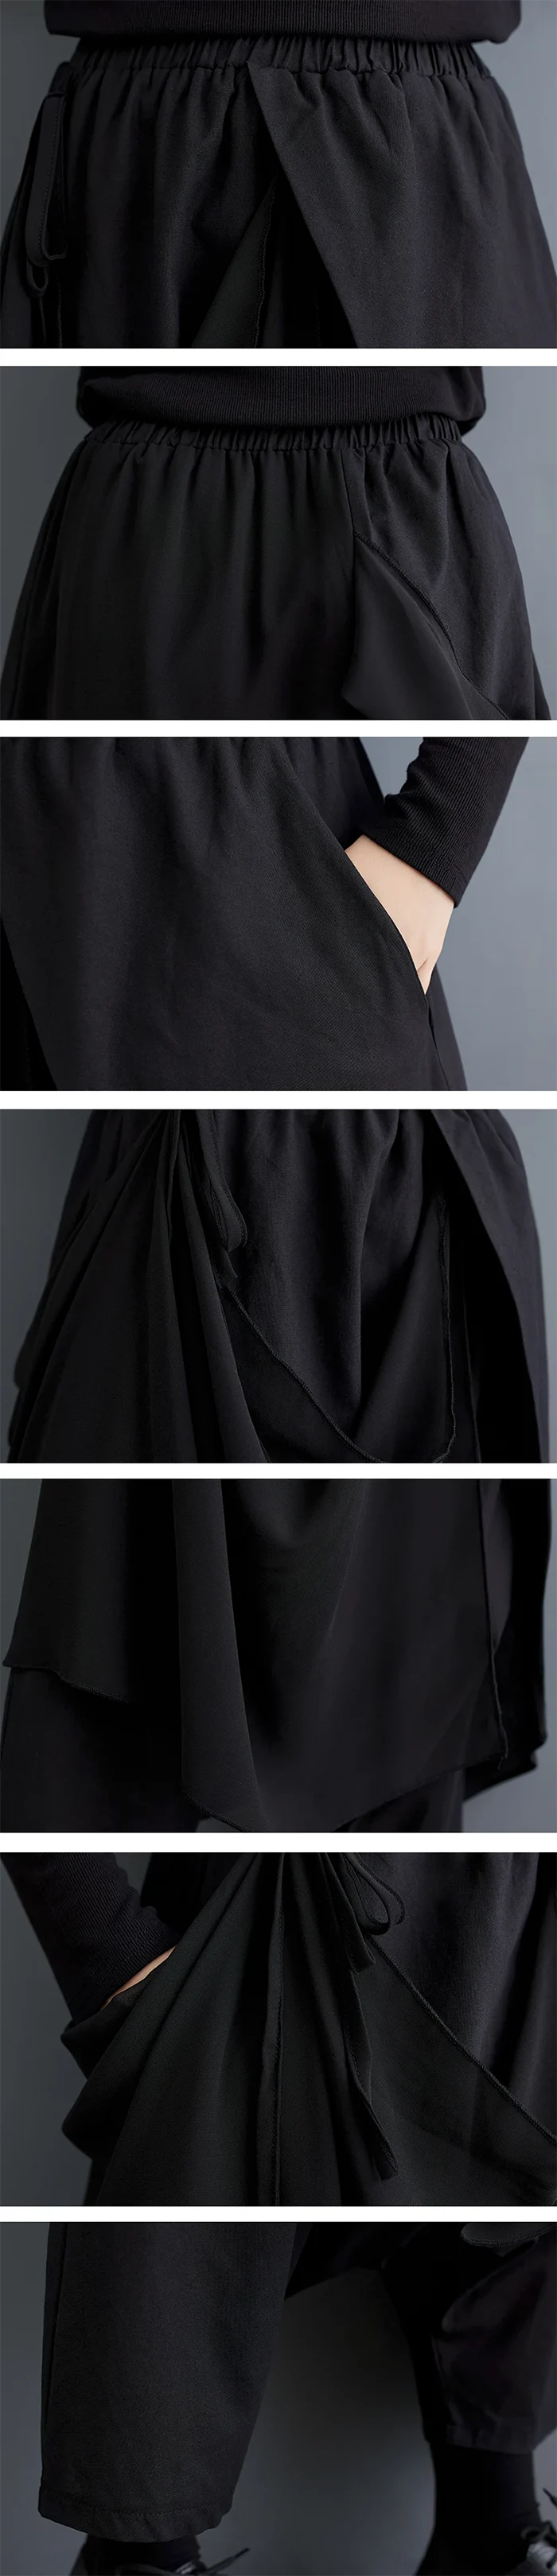 details of the Japanese style pants women's "Sanmu"